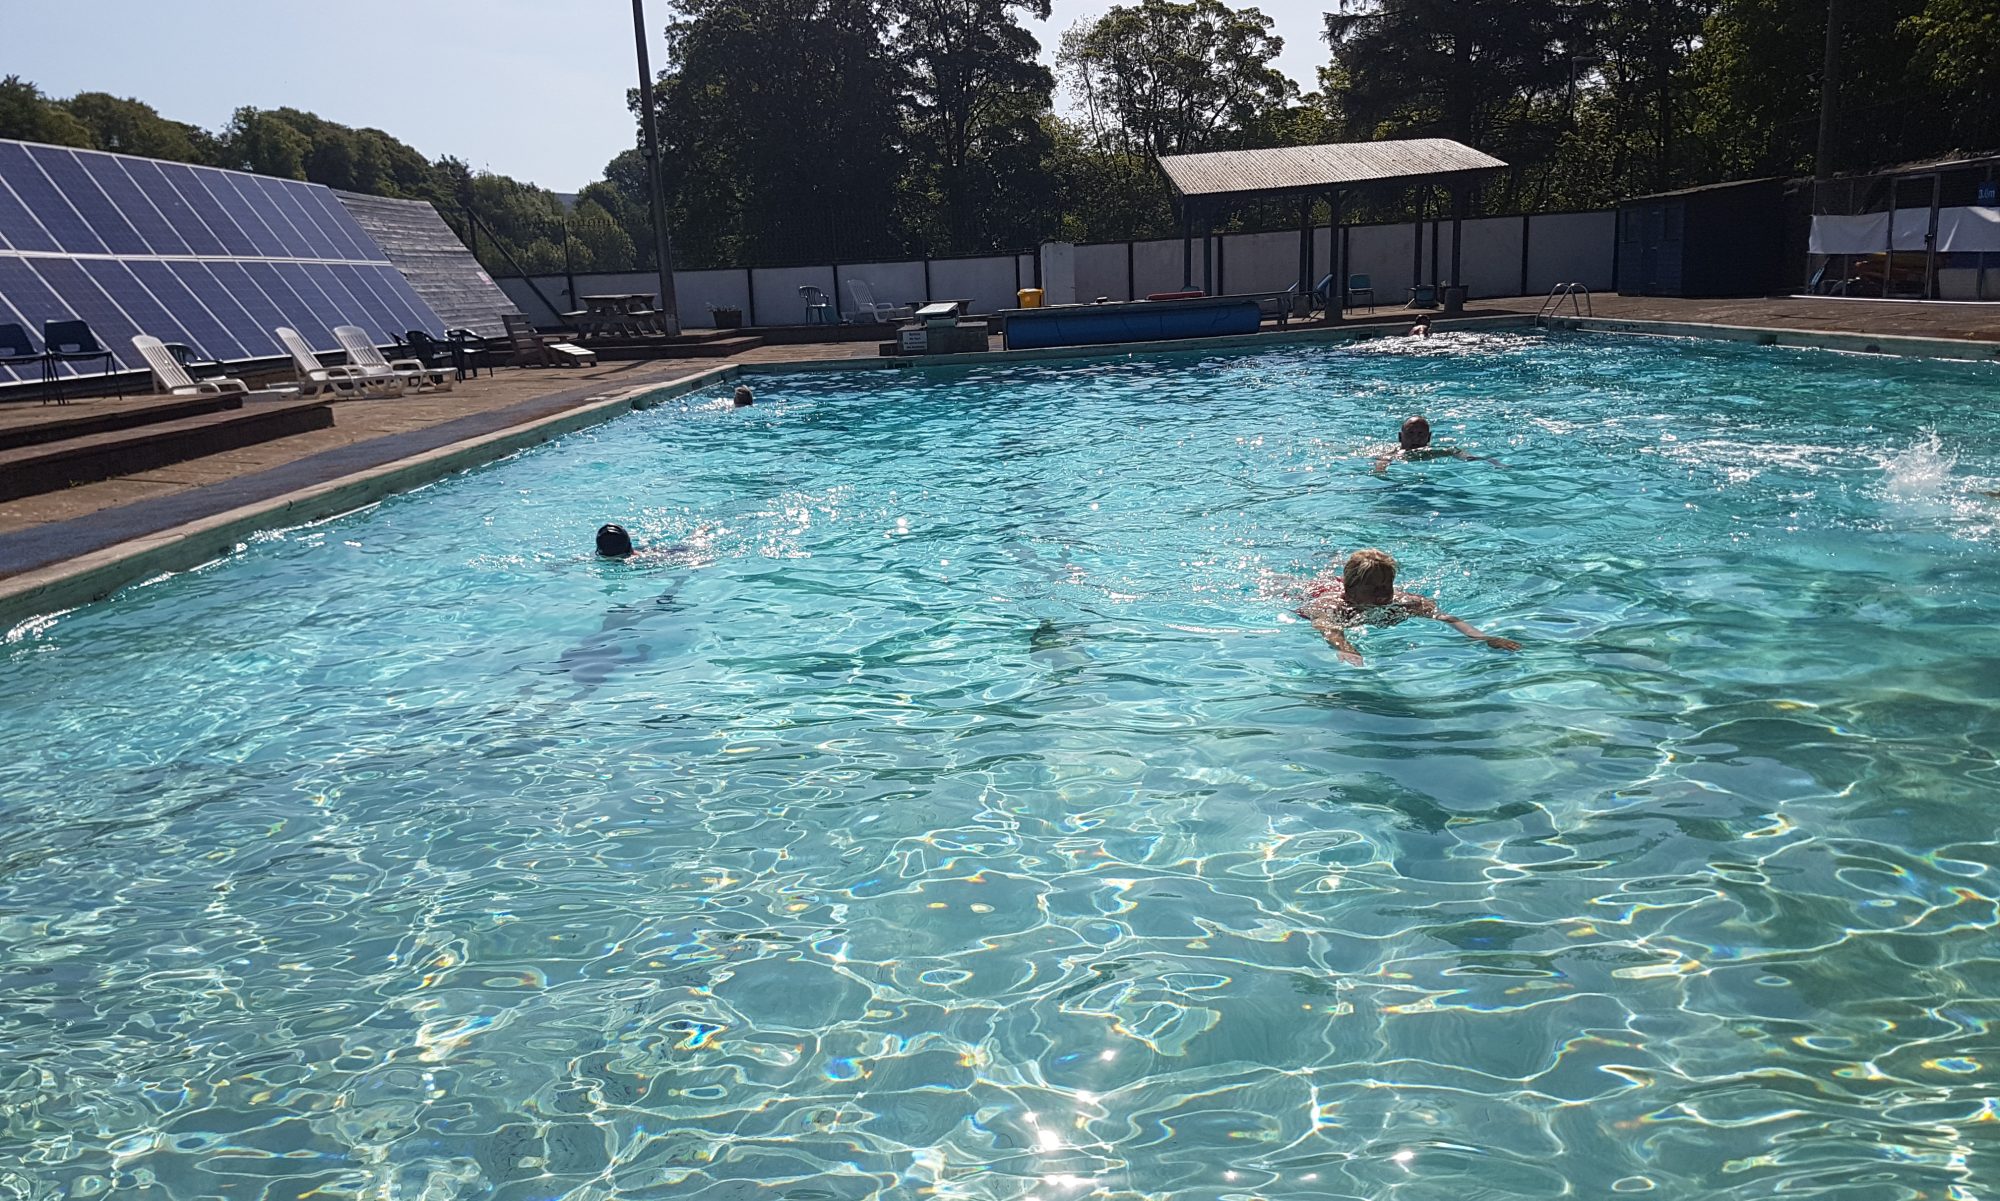 Stanhope open air swimming pool